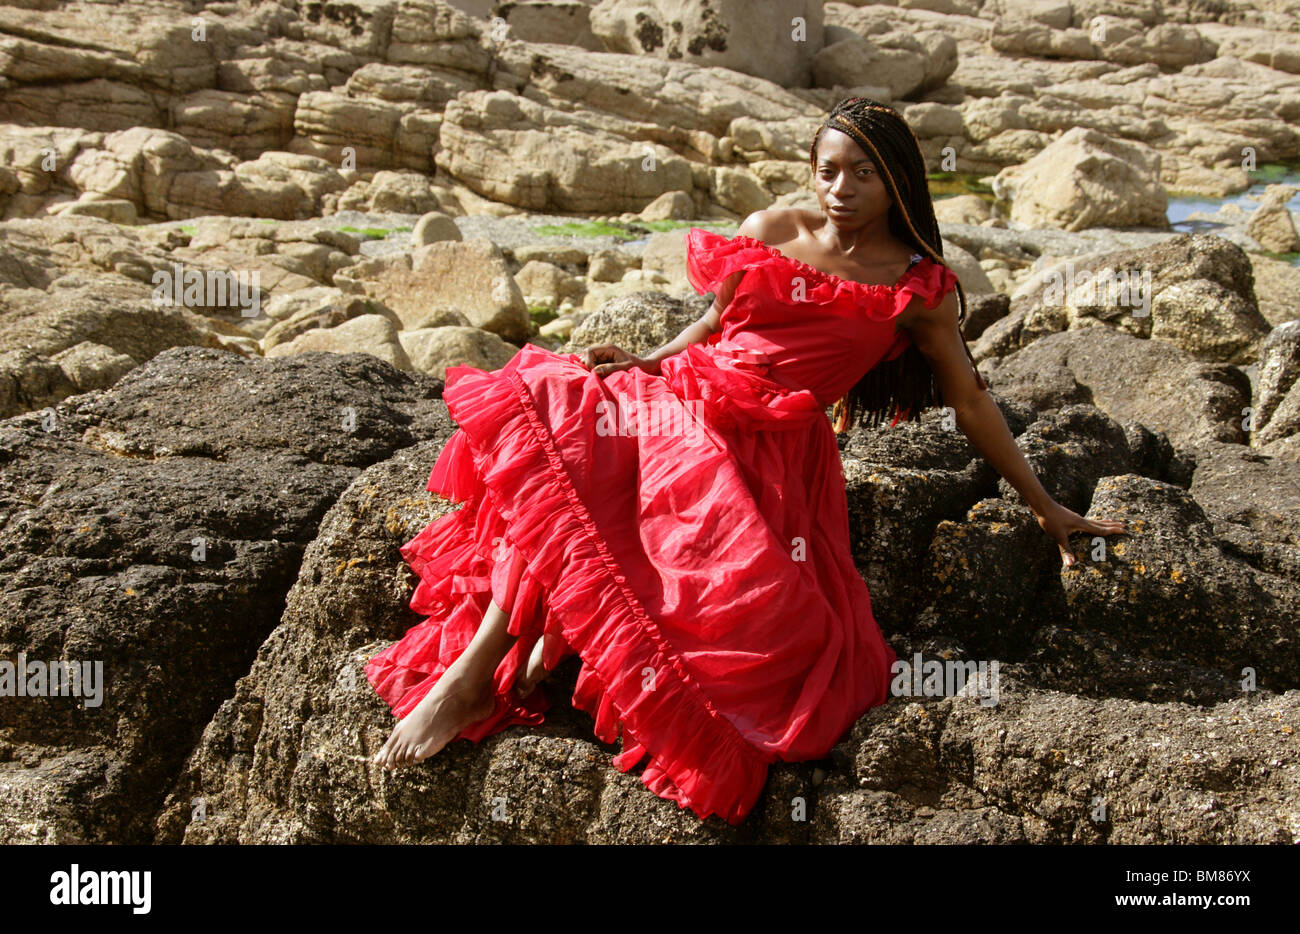 African Woman with Dreadlocks, Wearing a Red Dress, Sitting on Rocks by the Sea. Stock Photo